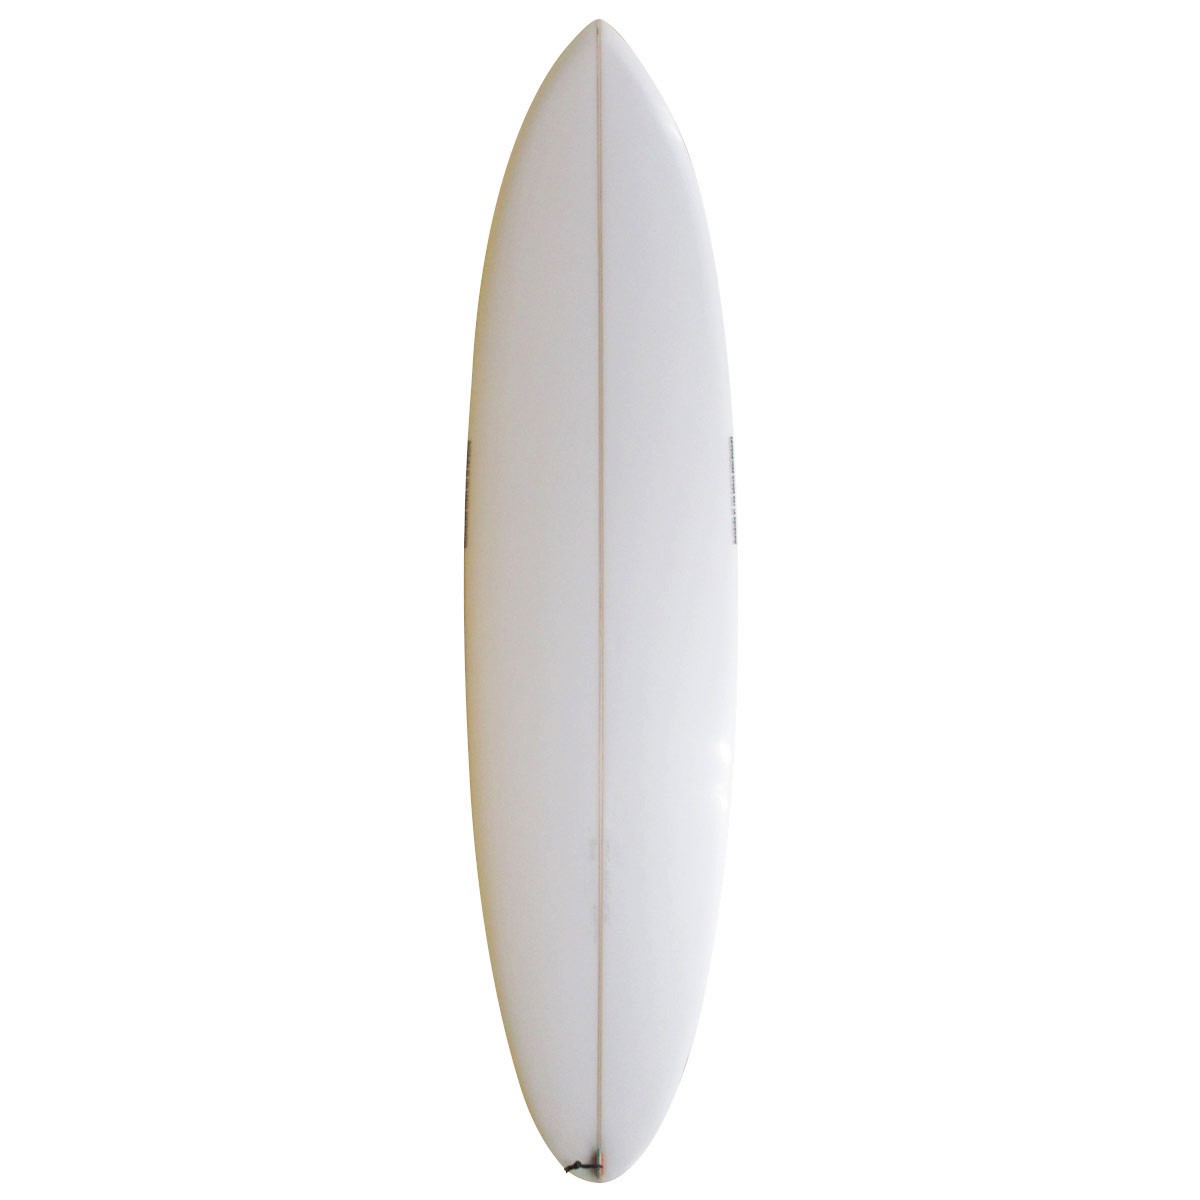 Morning of the Earth Surfboards / Morning of the Earth Surfboards / Massive 7`4